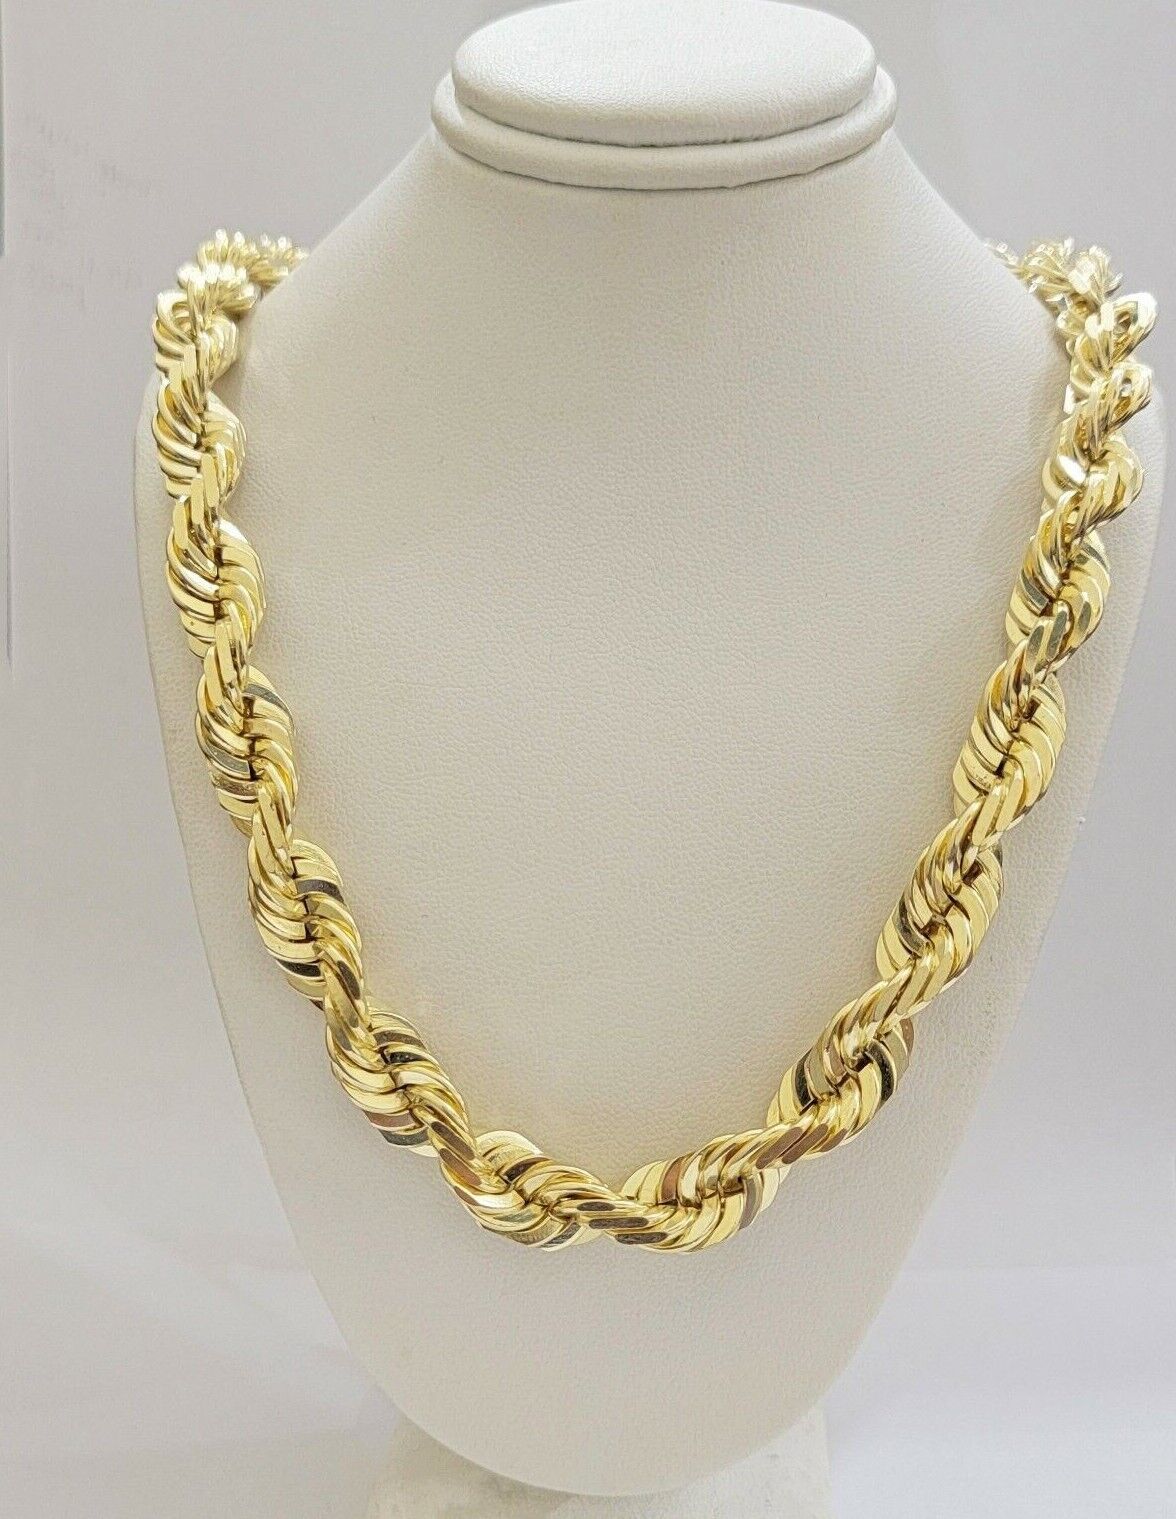 10mm Rope Chain Necklace 10k Yellow Gold 22" Choker Diamond Cut Men's REAL 10kt